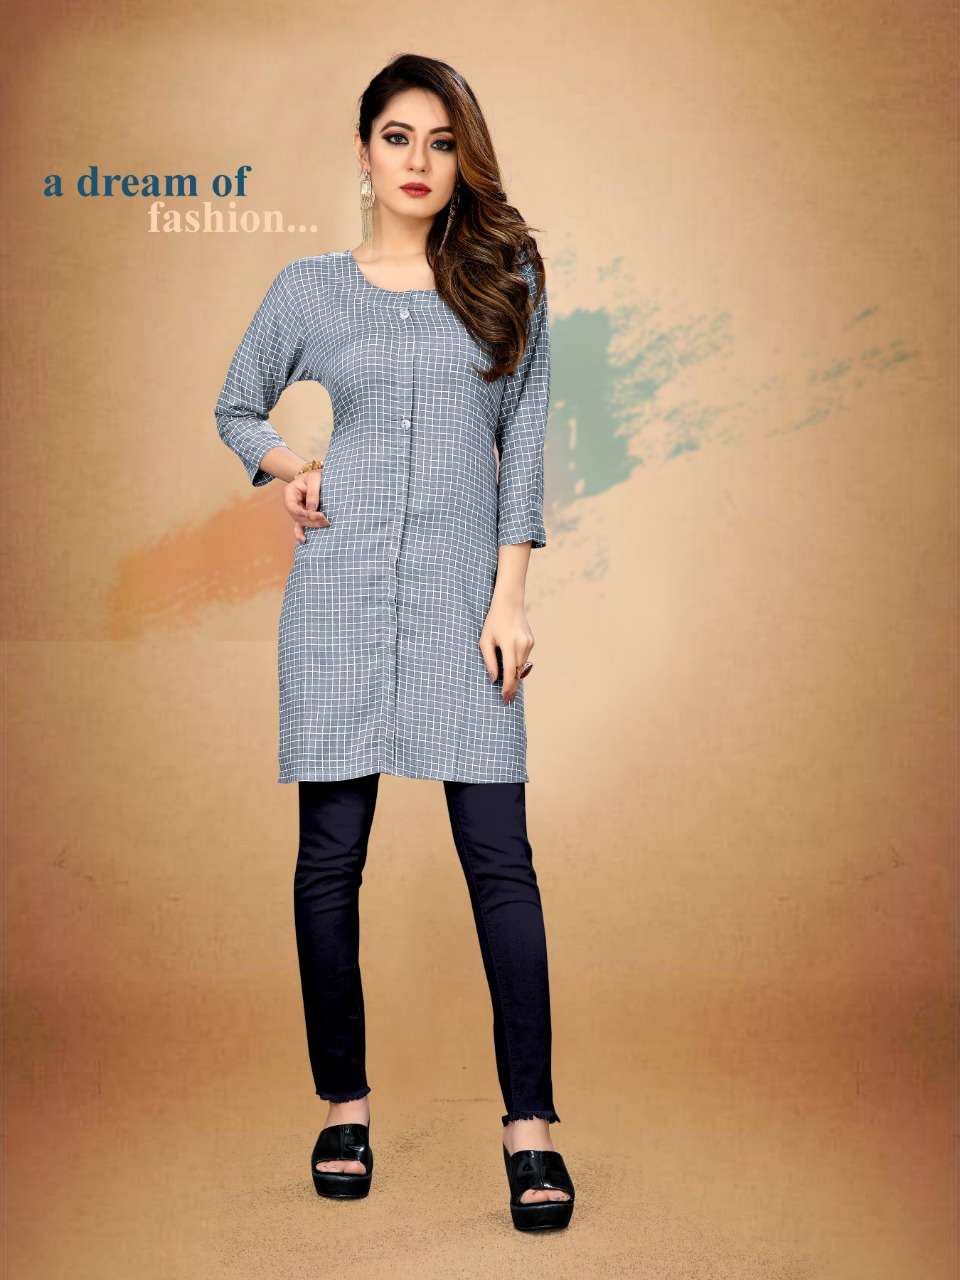 GULKAND BY WATERMELON 2901 TO 2908 SERIES DESIGNER BEAUTIFUL STYLISH FANCY COLORFUL PARTY WEAR & OCCASIONAL WEAR HEAVY RAYON PRINTED KURTIS AT WHOLESALE PRICE